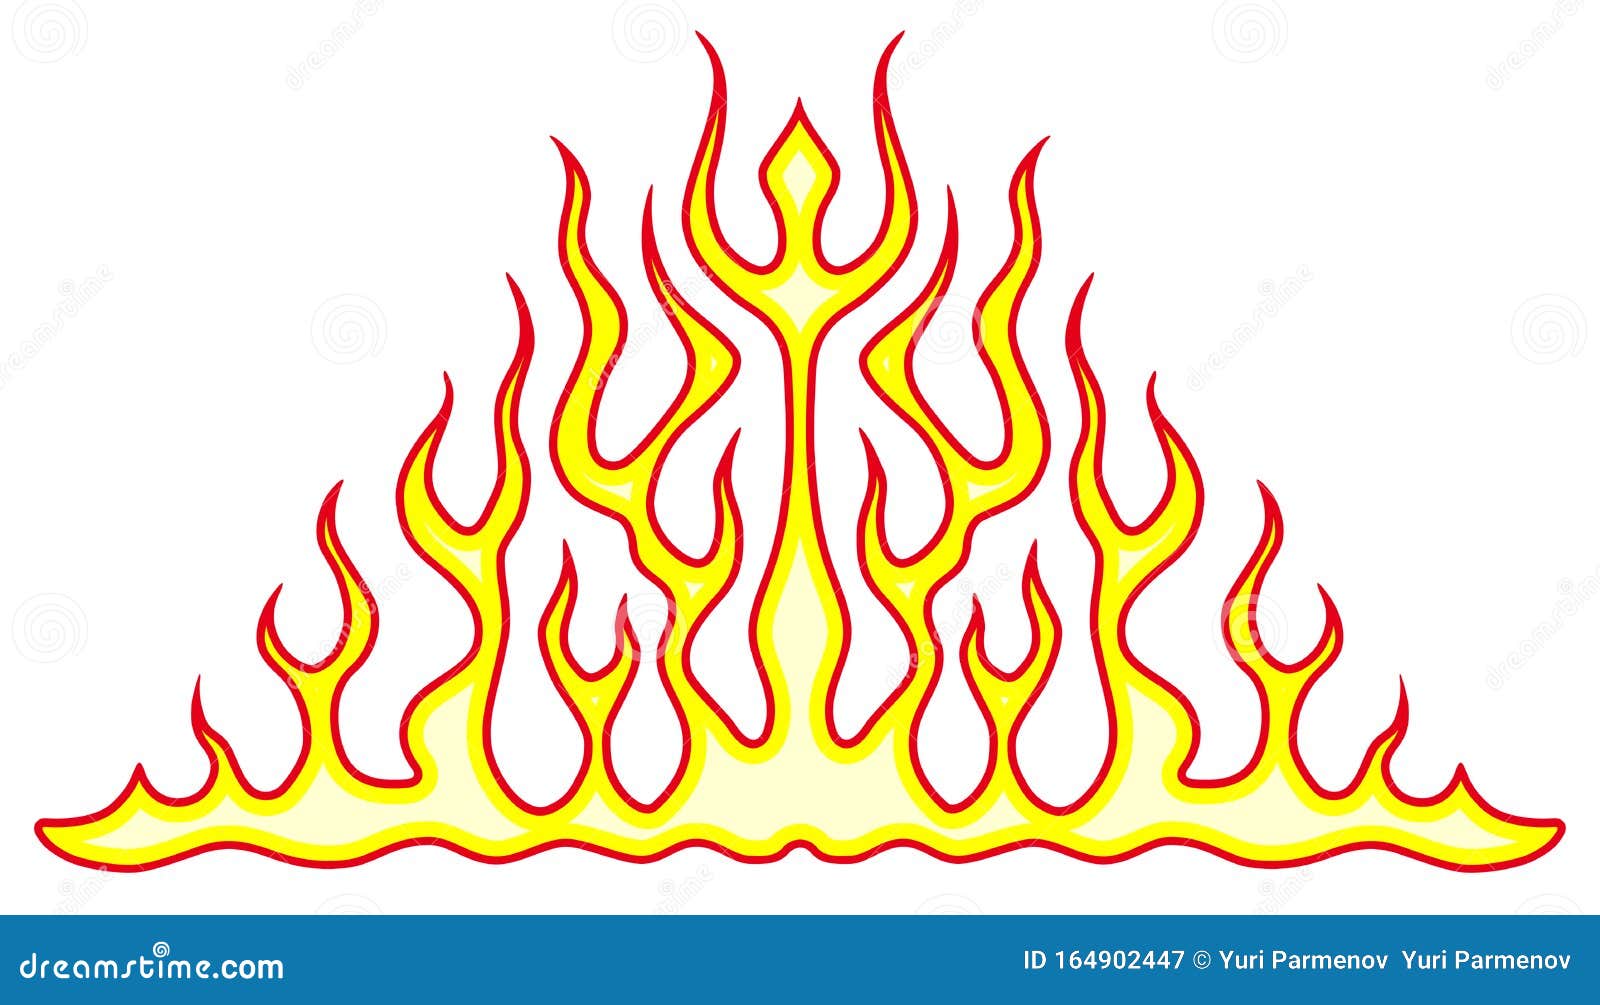 Vehicle sticker - burning flame, car and bike color vinyl decals, isolated  on white background. Hot fire decal artwork, illustration of pattern fire  stencil. Vector Stock Vector